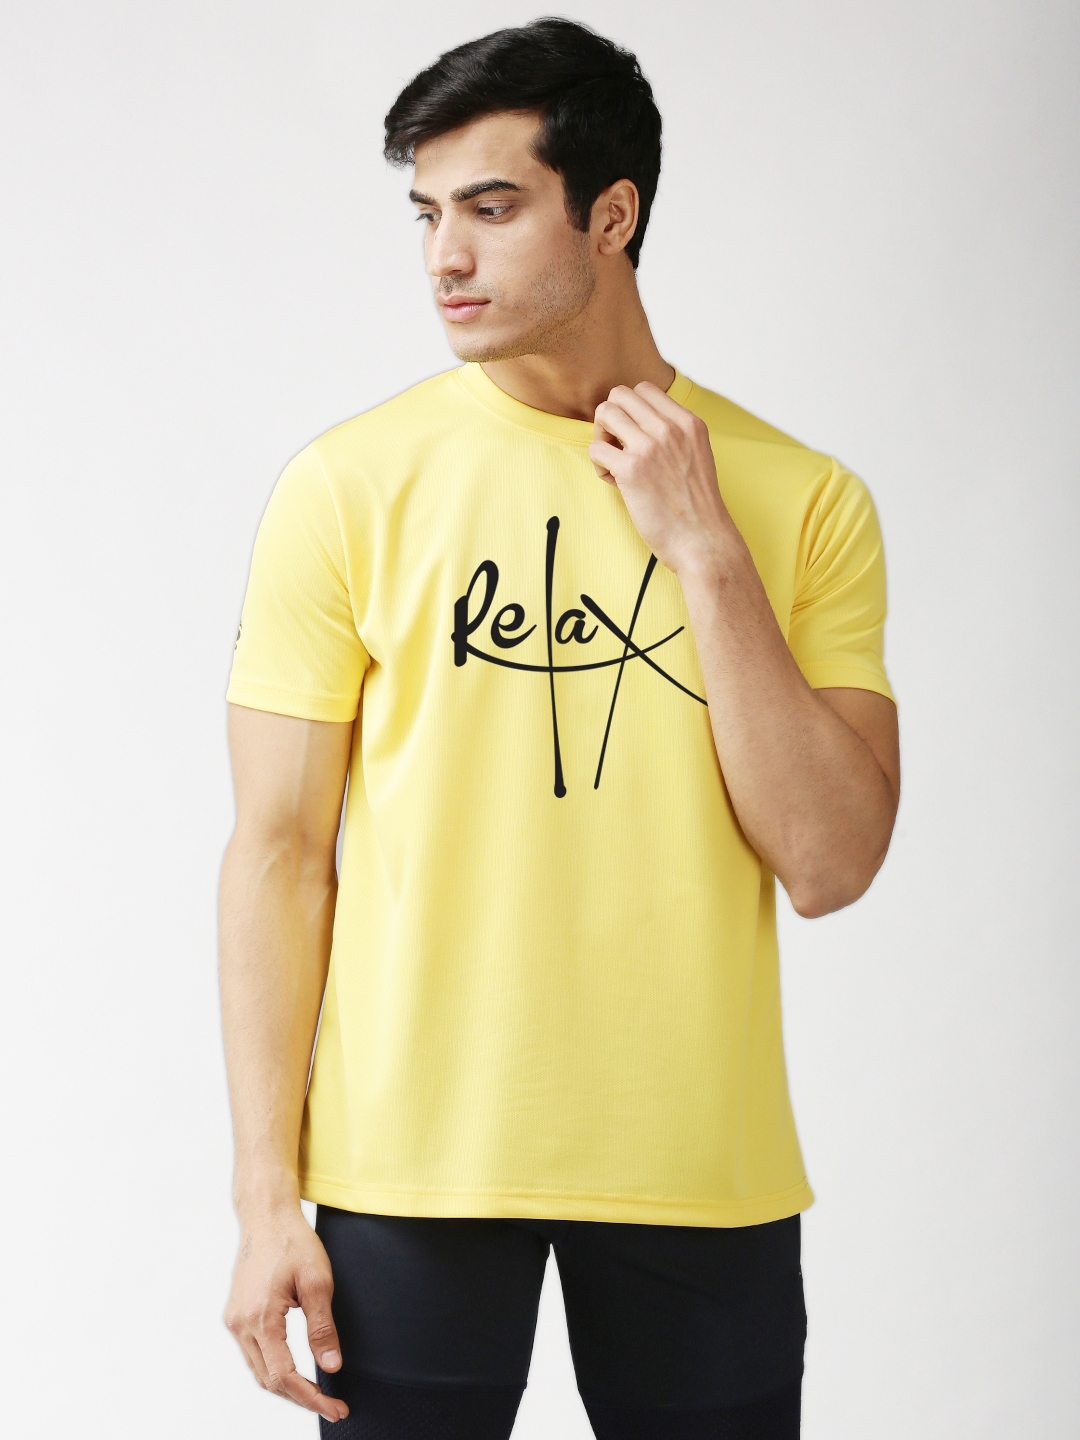 Eppe | EPPE Dryfit Micropolyester Tshirt for Men's Round Neck Half Sleeves Sports Casual - Yellow - Size-S(36)